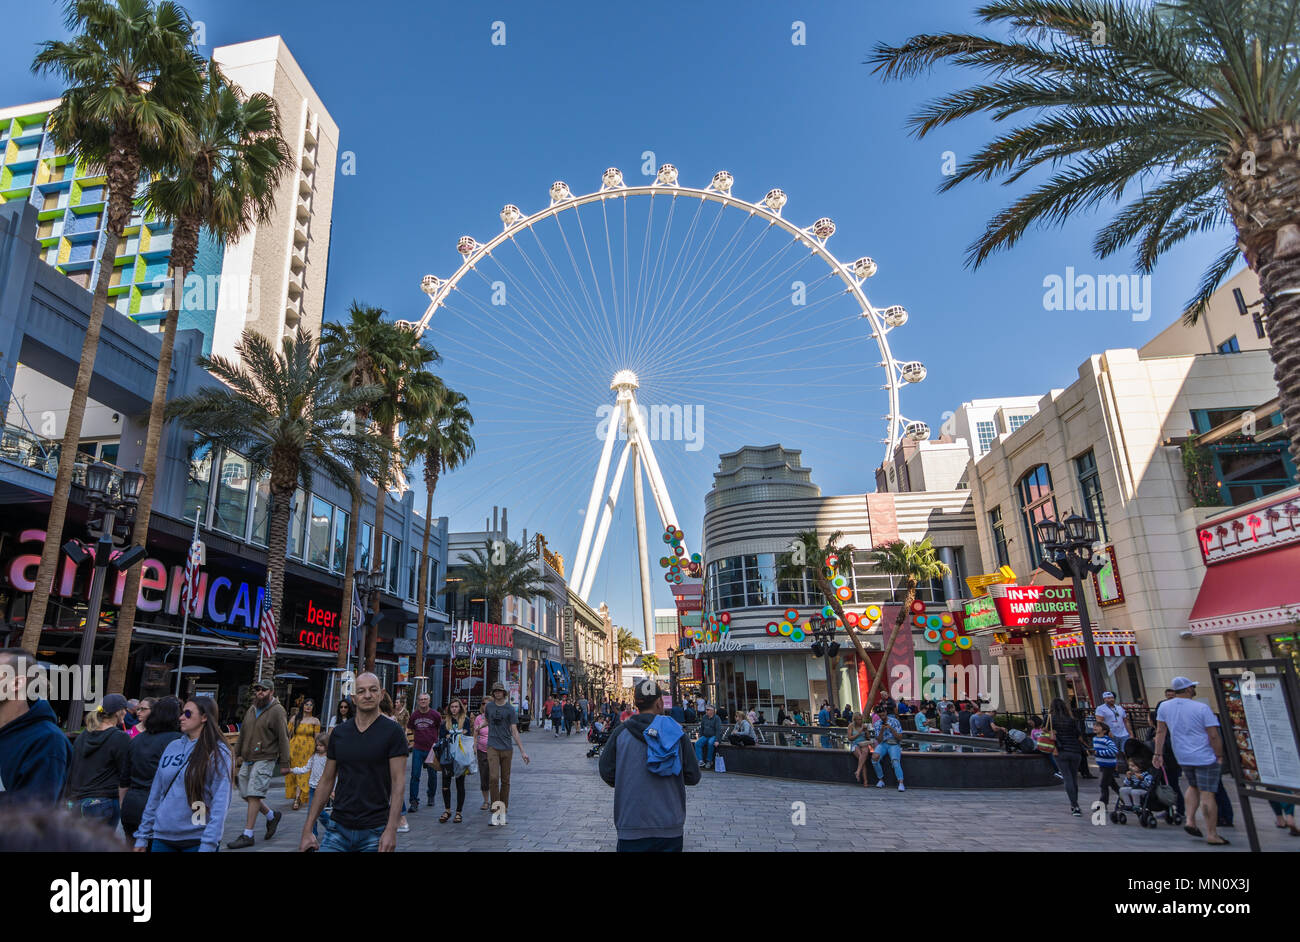 Las Vegas, US - April 27, 2018: Tourtists visting the LInq promenade in Las Vegas as seen on a sunny day Stock Photo